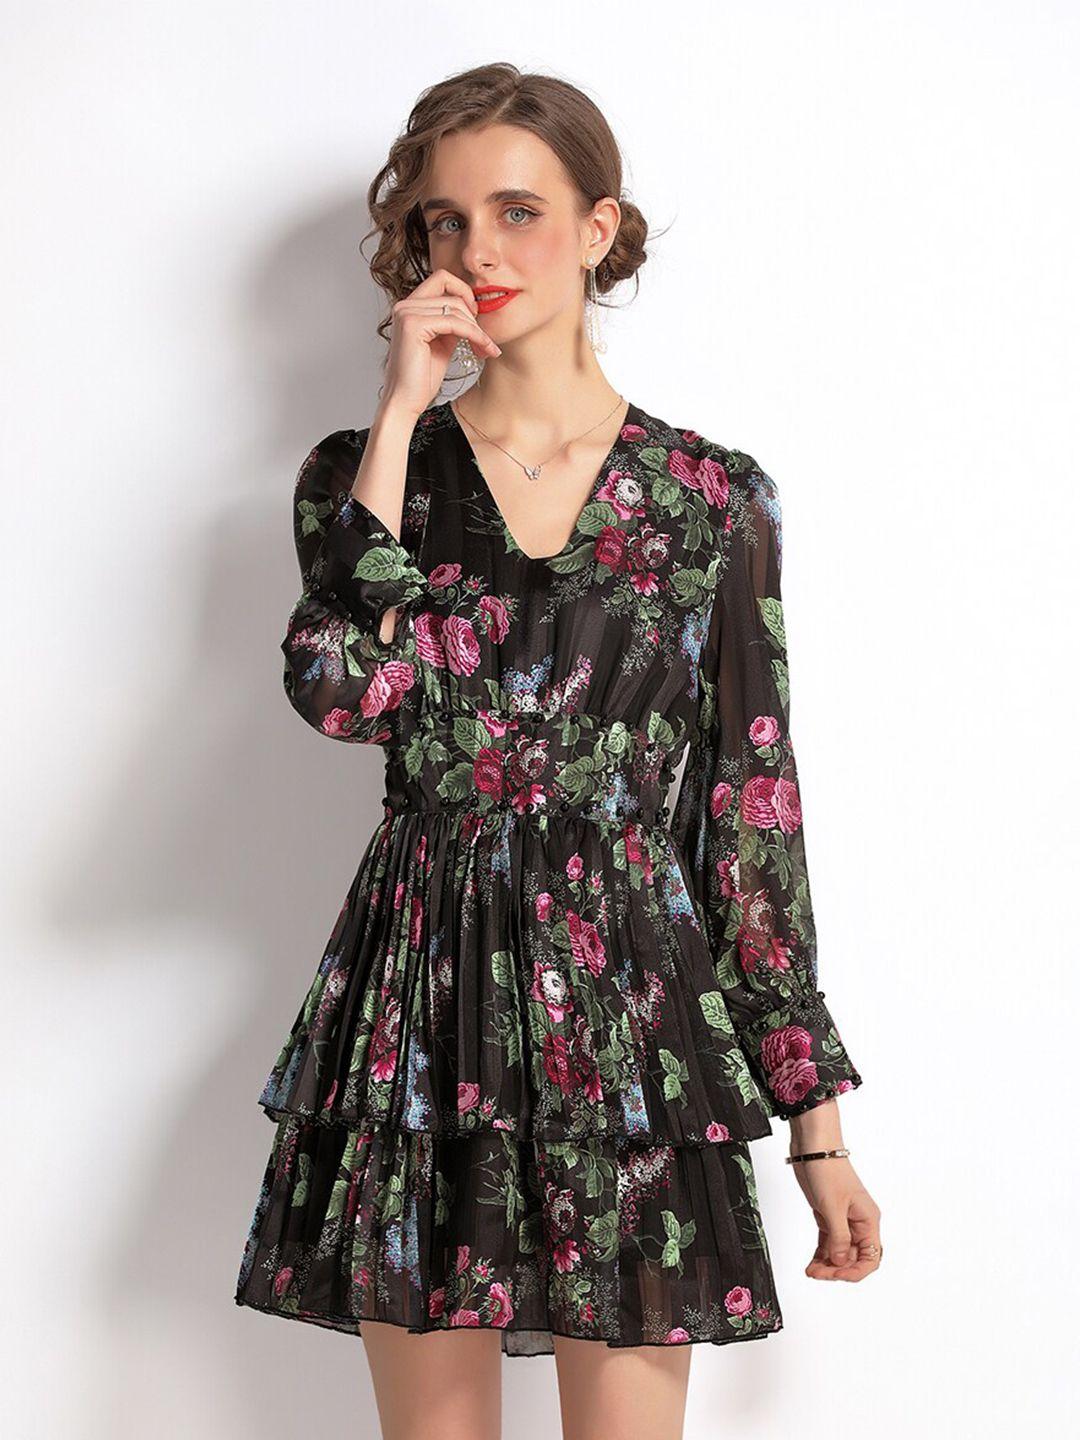 jc collection multicoloured floral dress